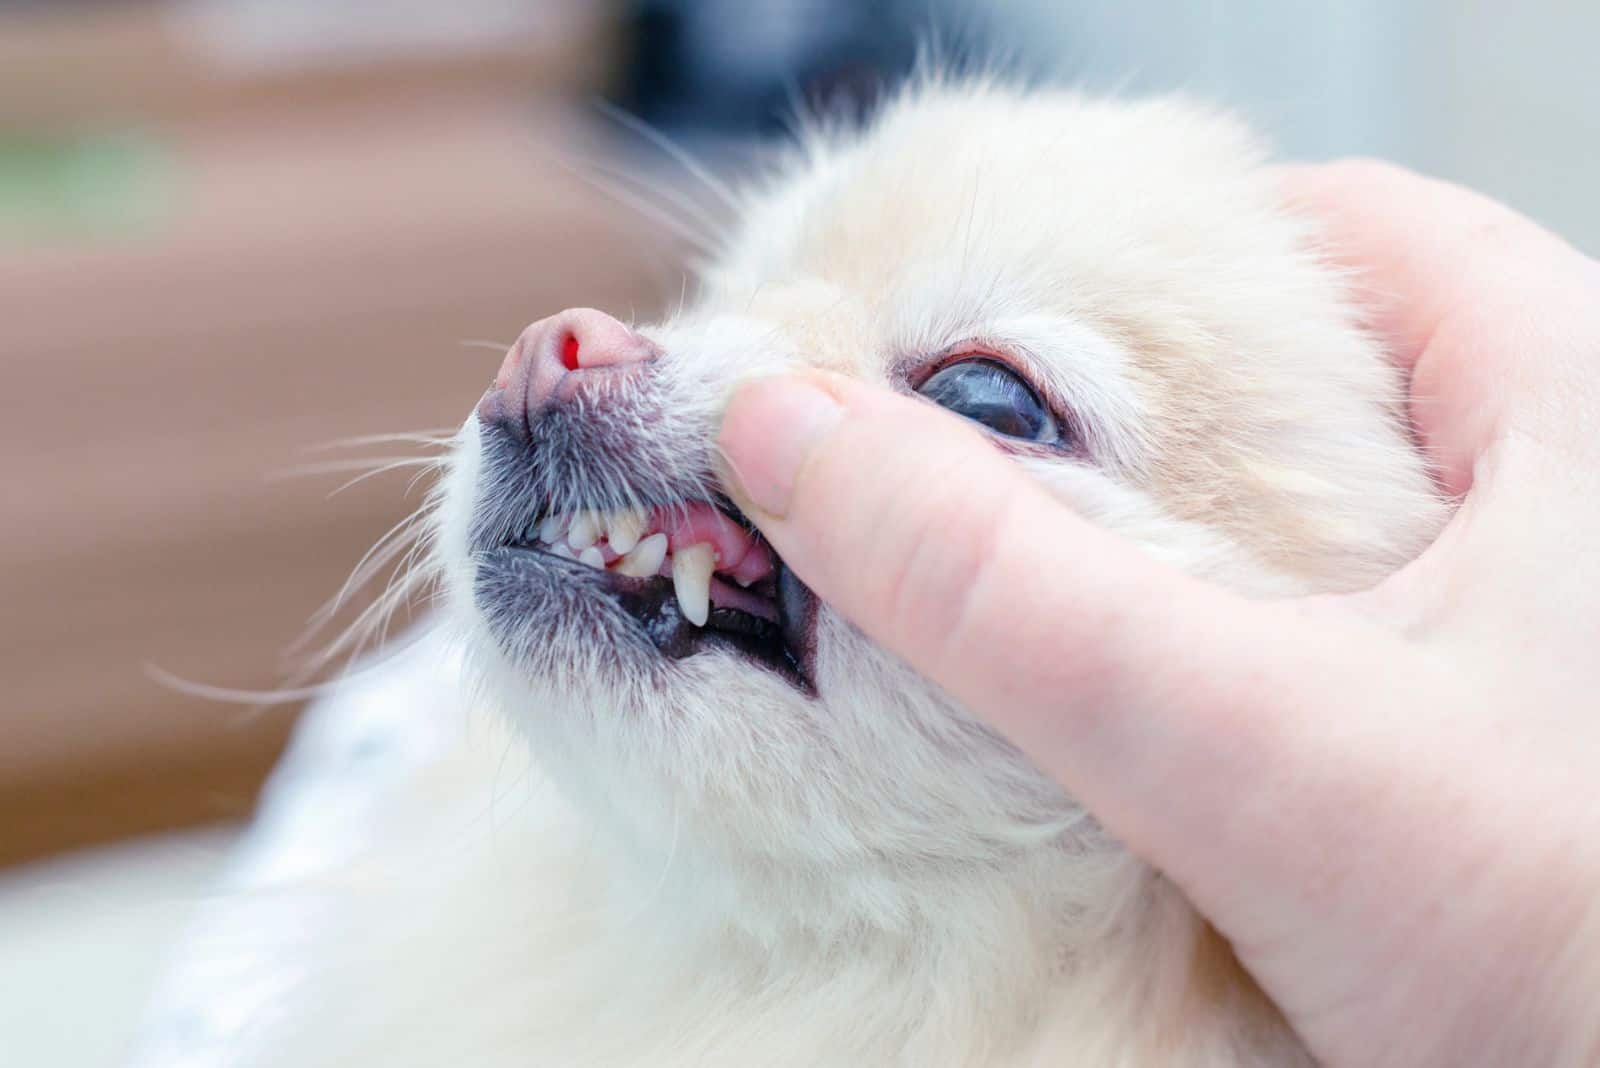 a woman examines her dog's gums